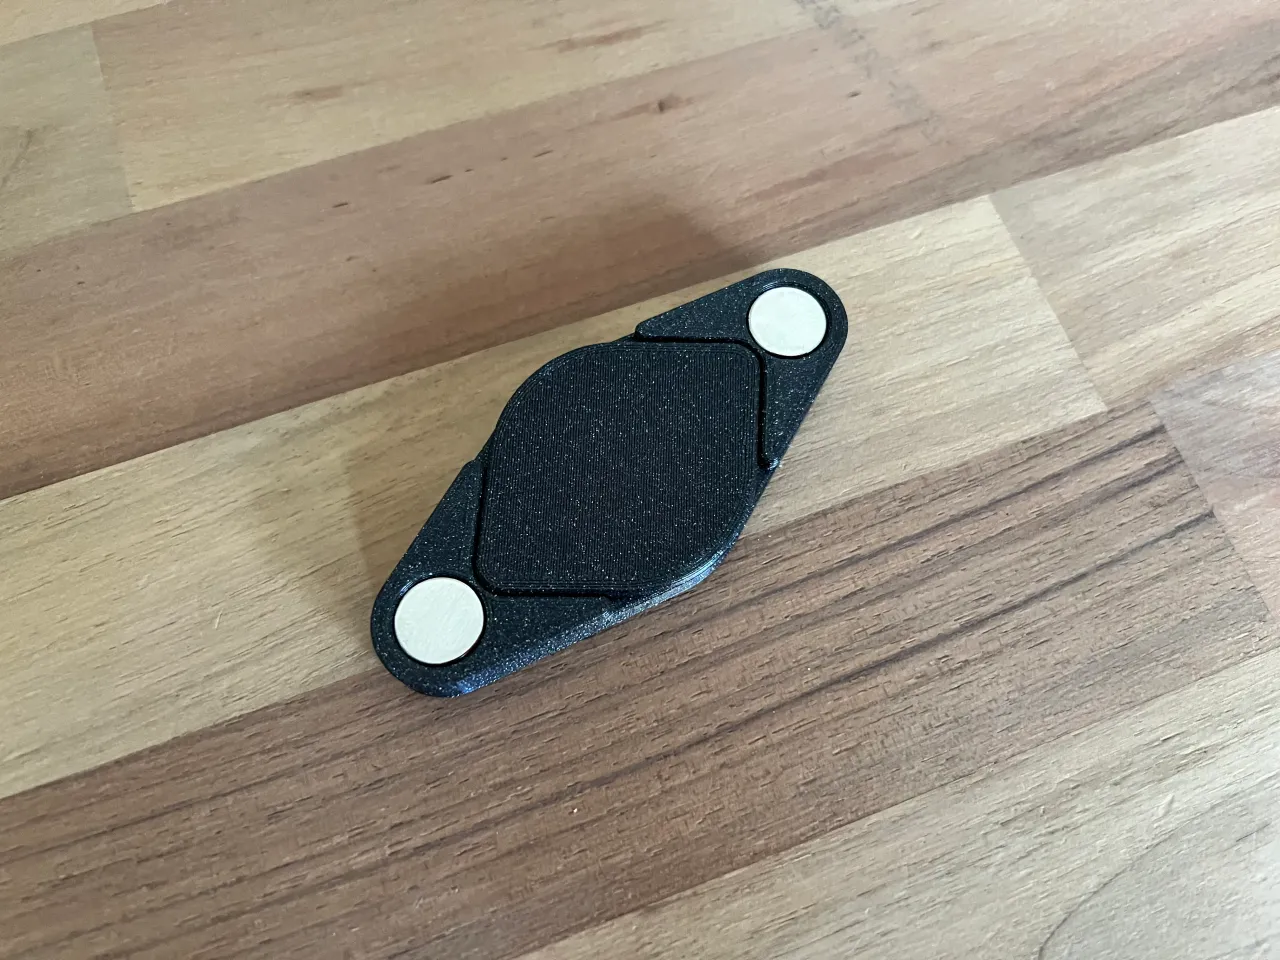 Magnetic AirTag Holder